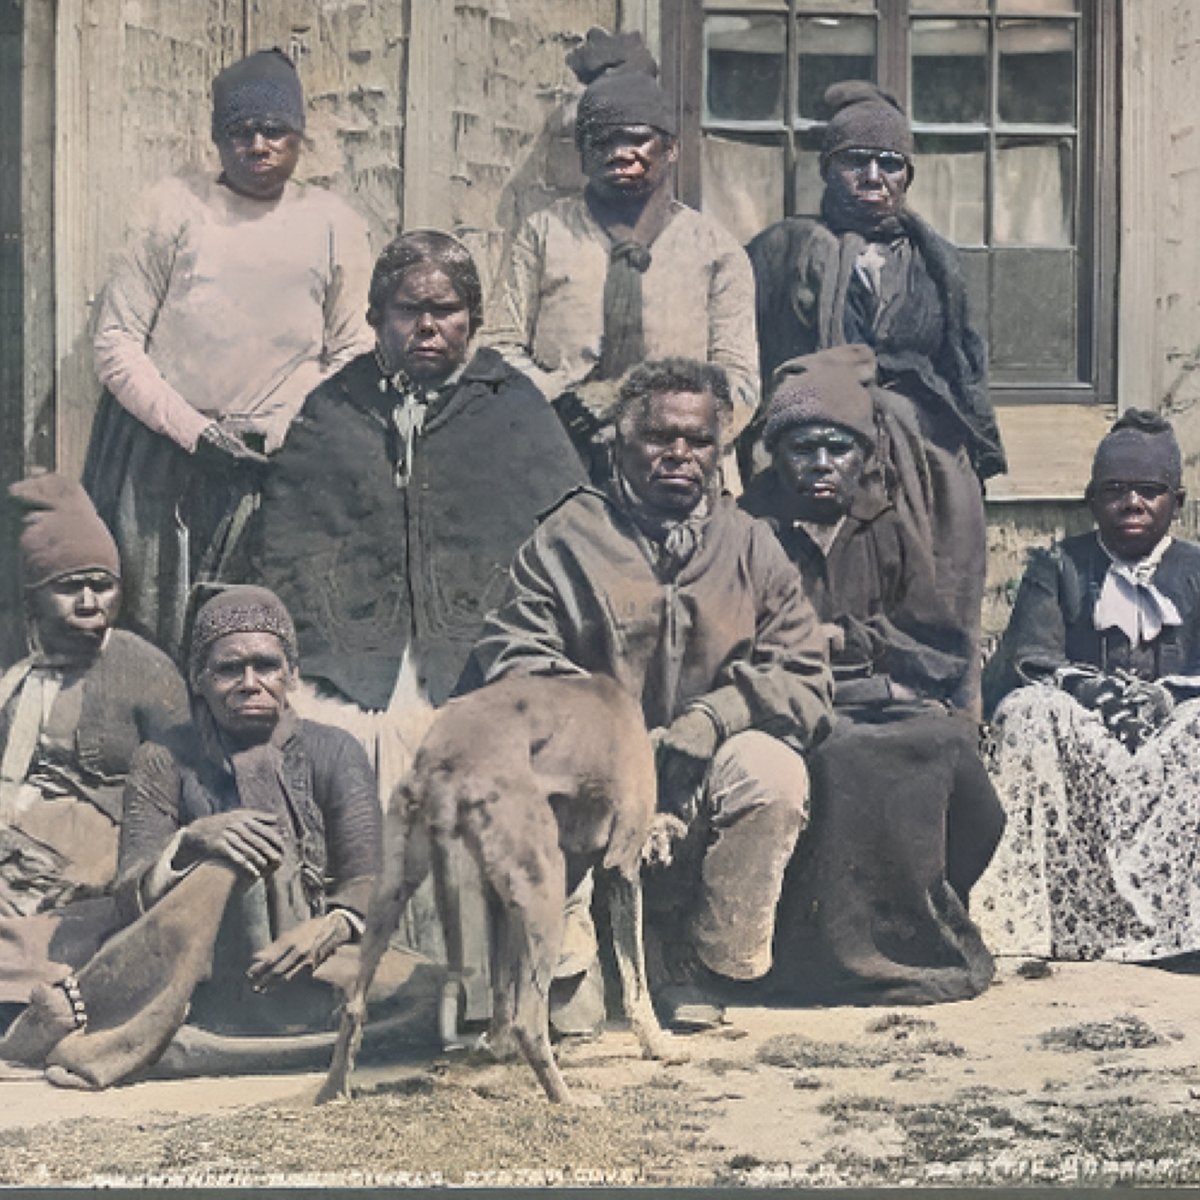 The British almost eliminated the entire Tasmanian Population of Australia in the 1800s by kidnapping, enslaving, torturing and murdering them.   A THREAD!